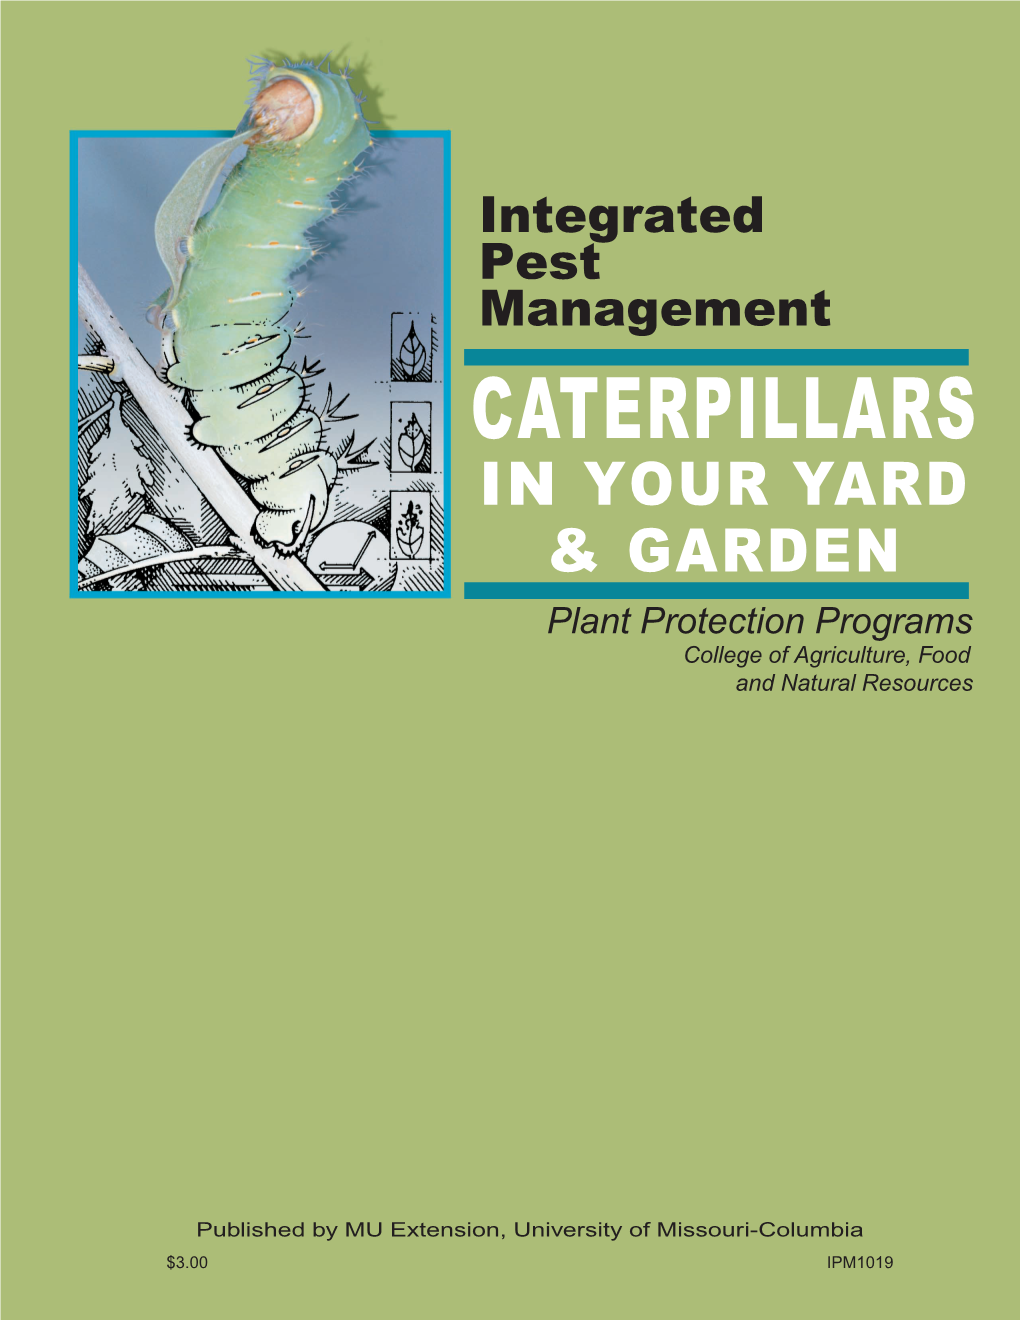 CATERPILLARS in YOUR YARD & GARDEN Plant Protection Programs College of Agriculture, Food and Natural Resources